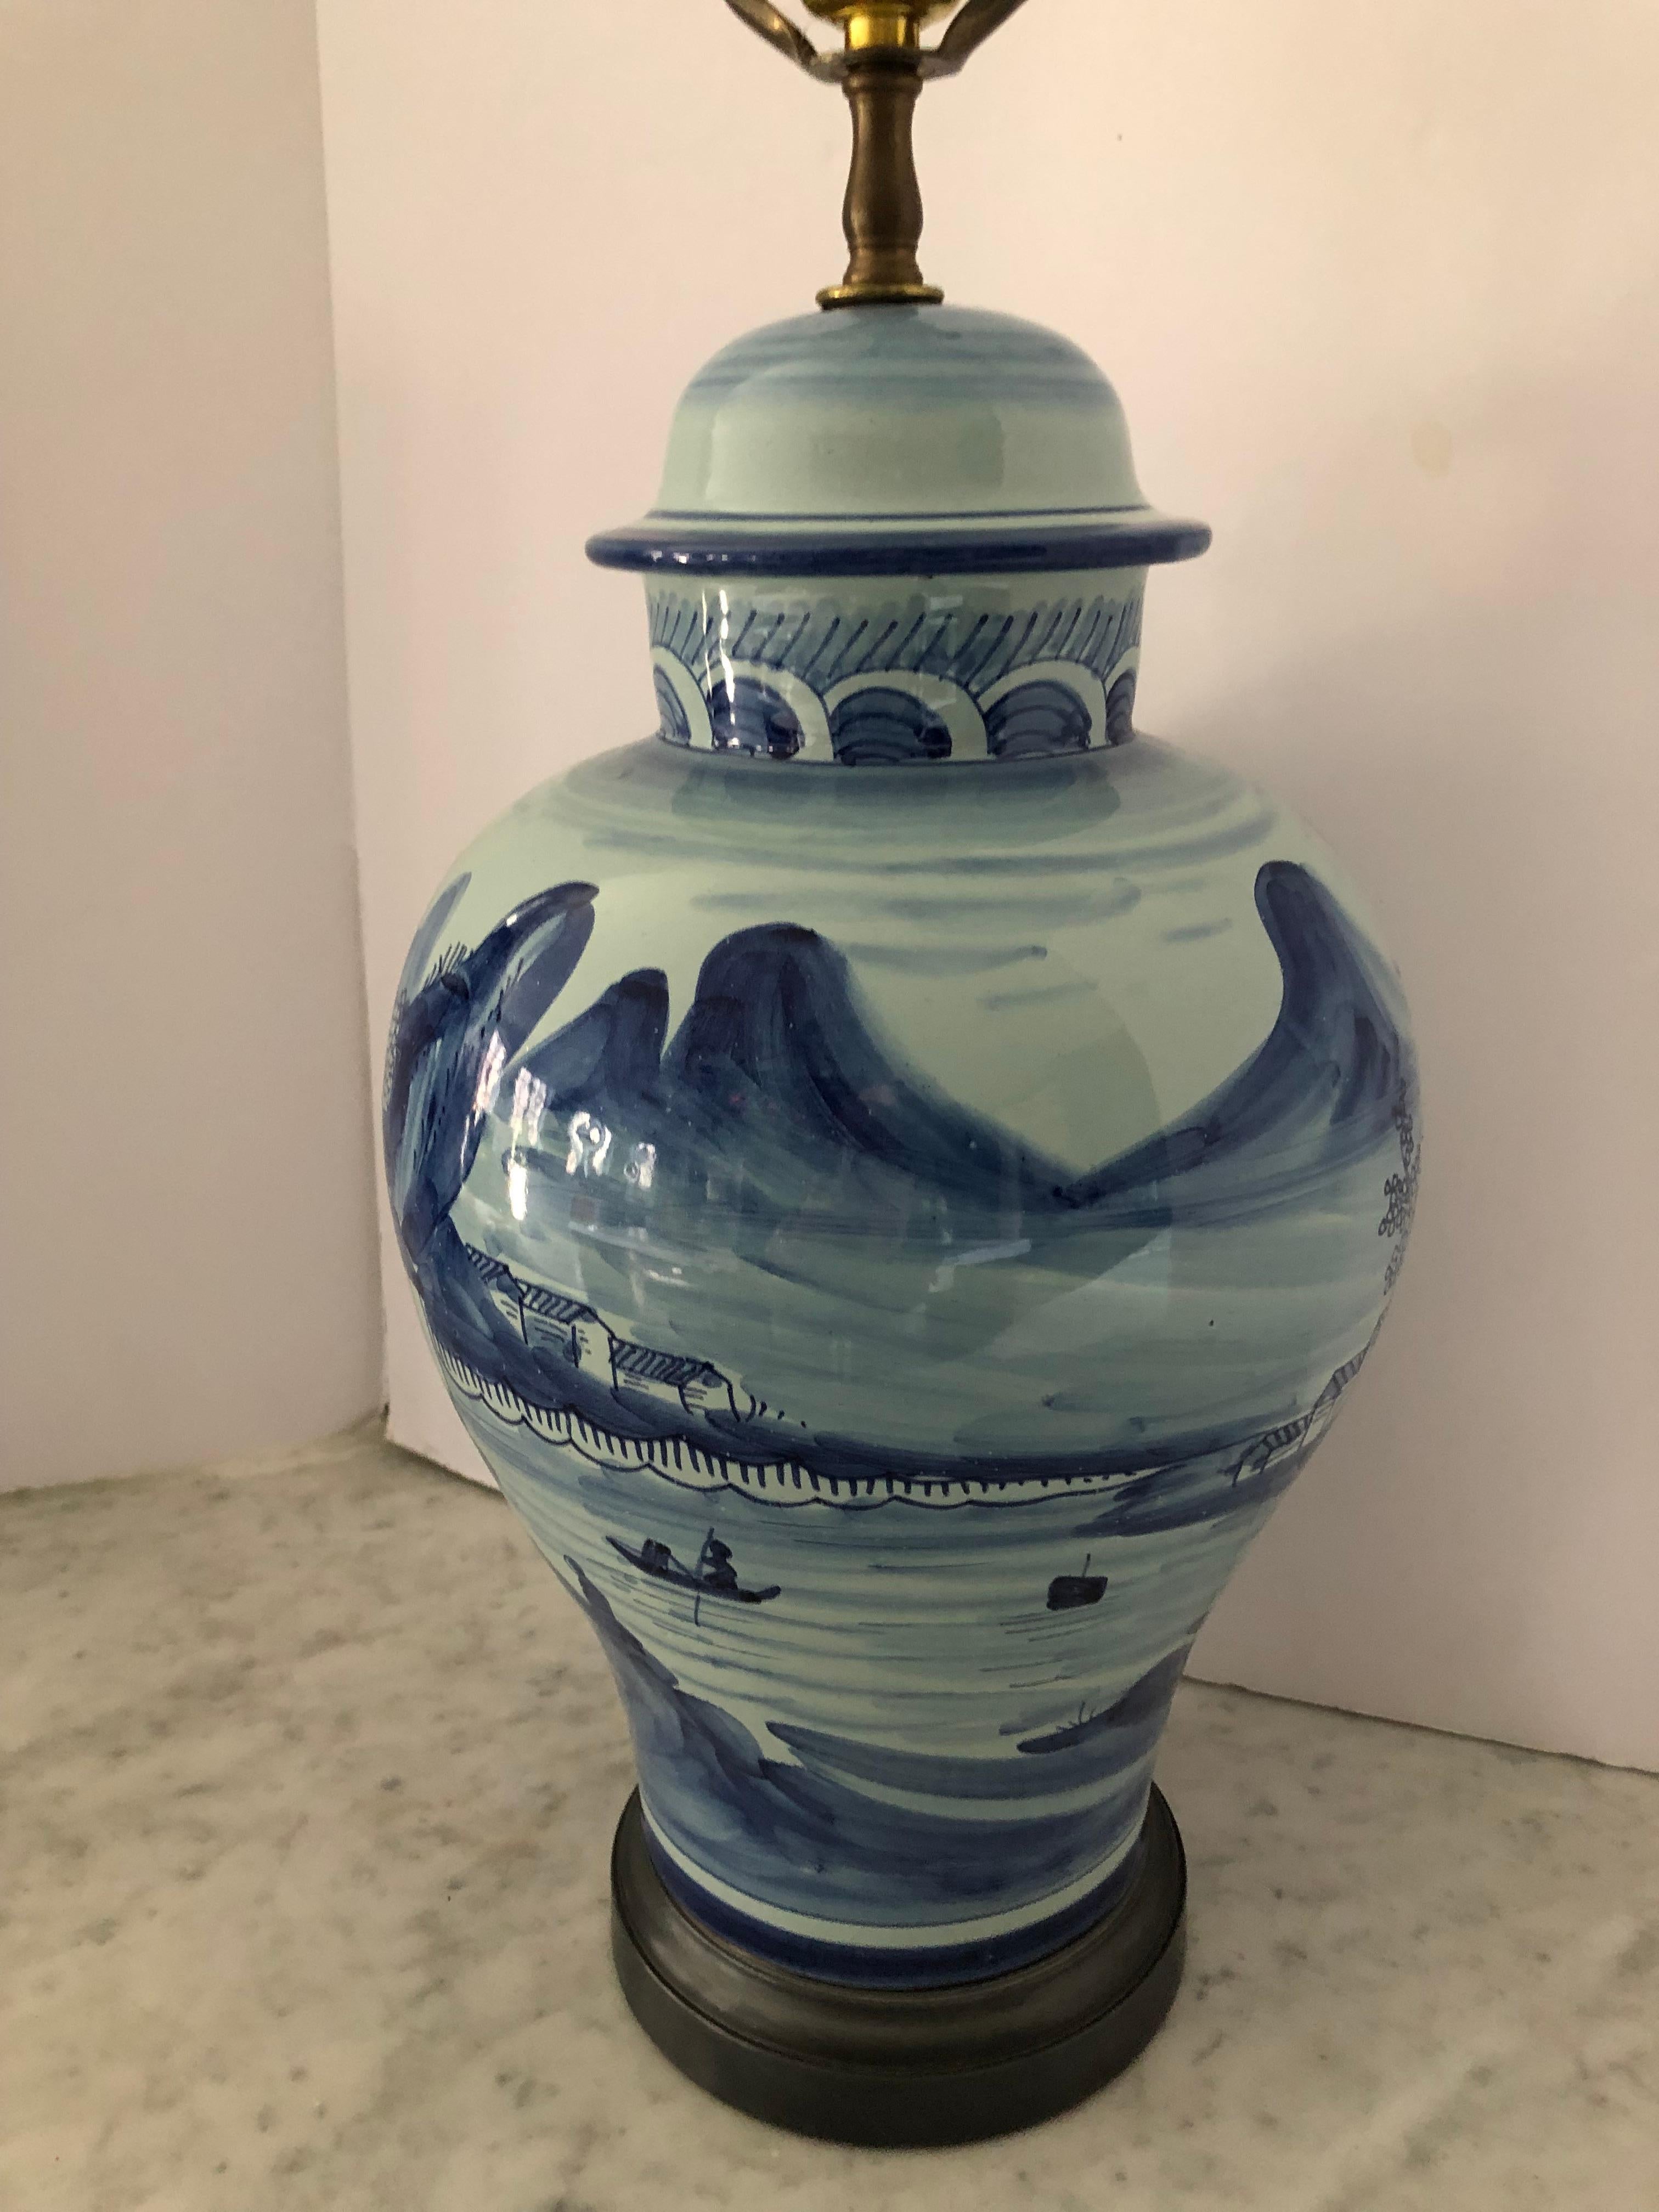 Classic blue and white ginger jar table lamp by Chapman. Lamp depicts Asian scenery and has a black base. Finial is a matte black ball. Chapman label.
 